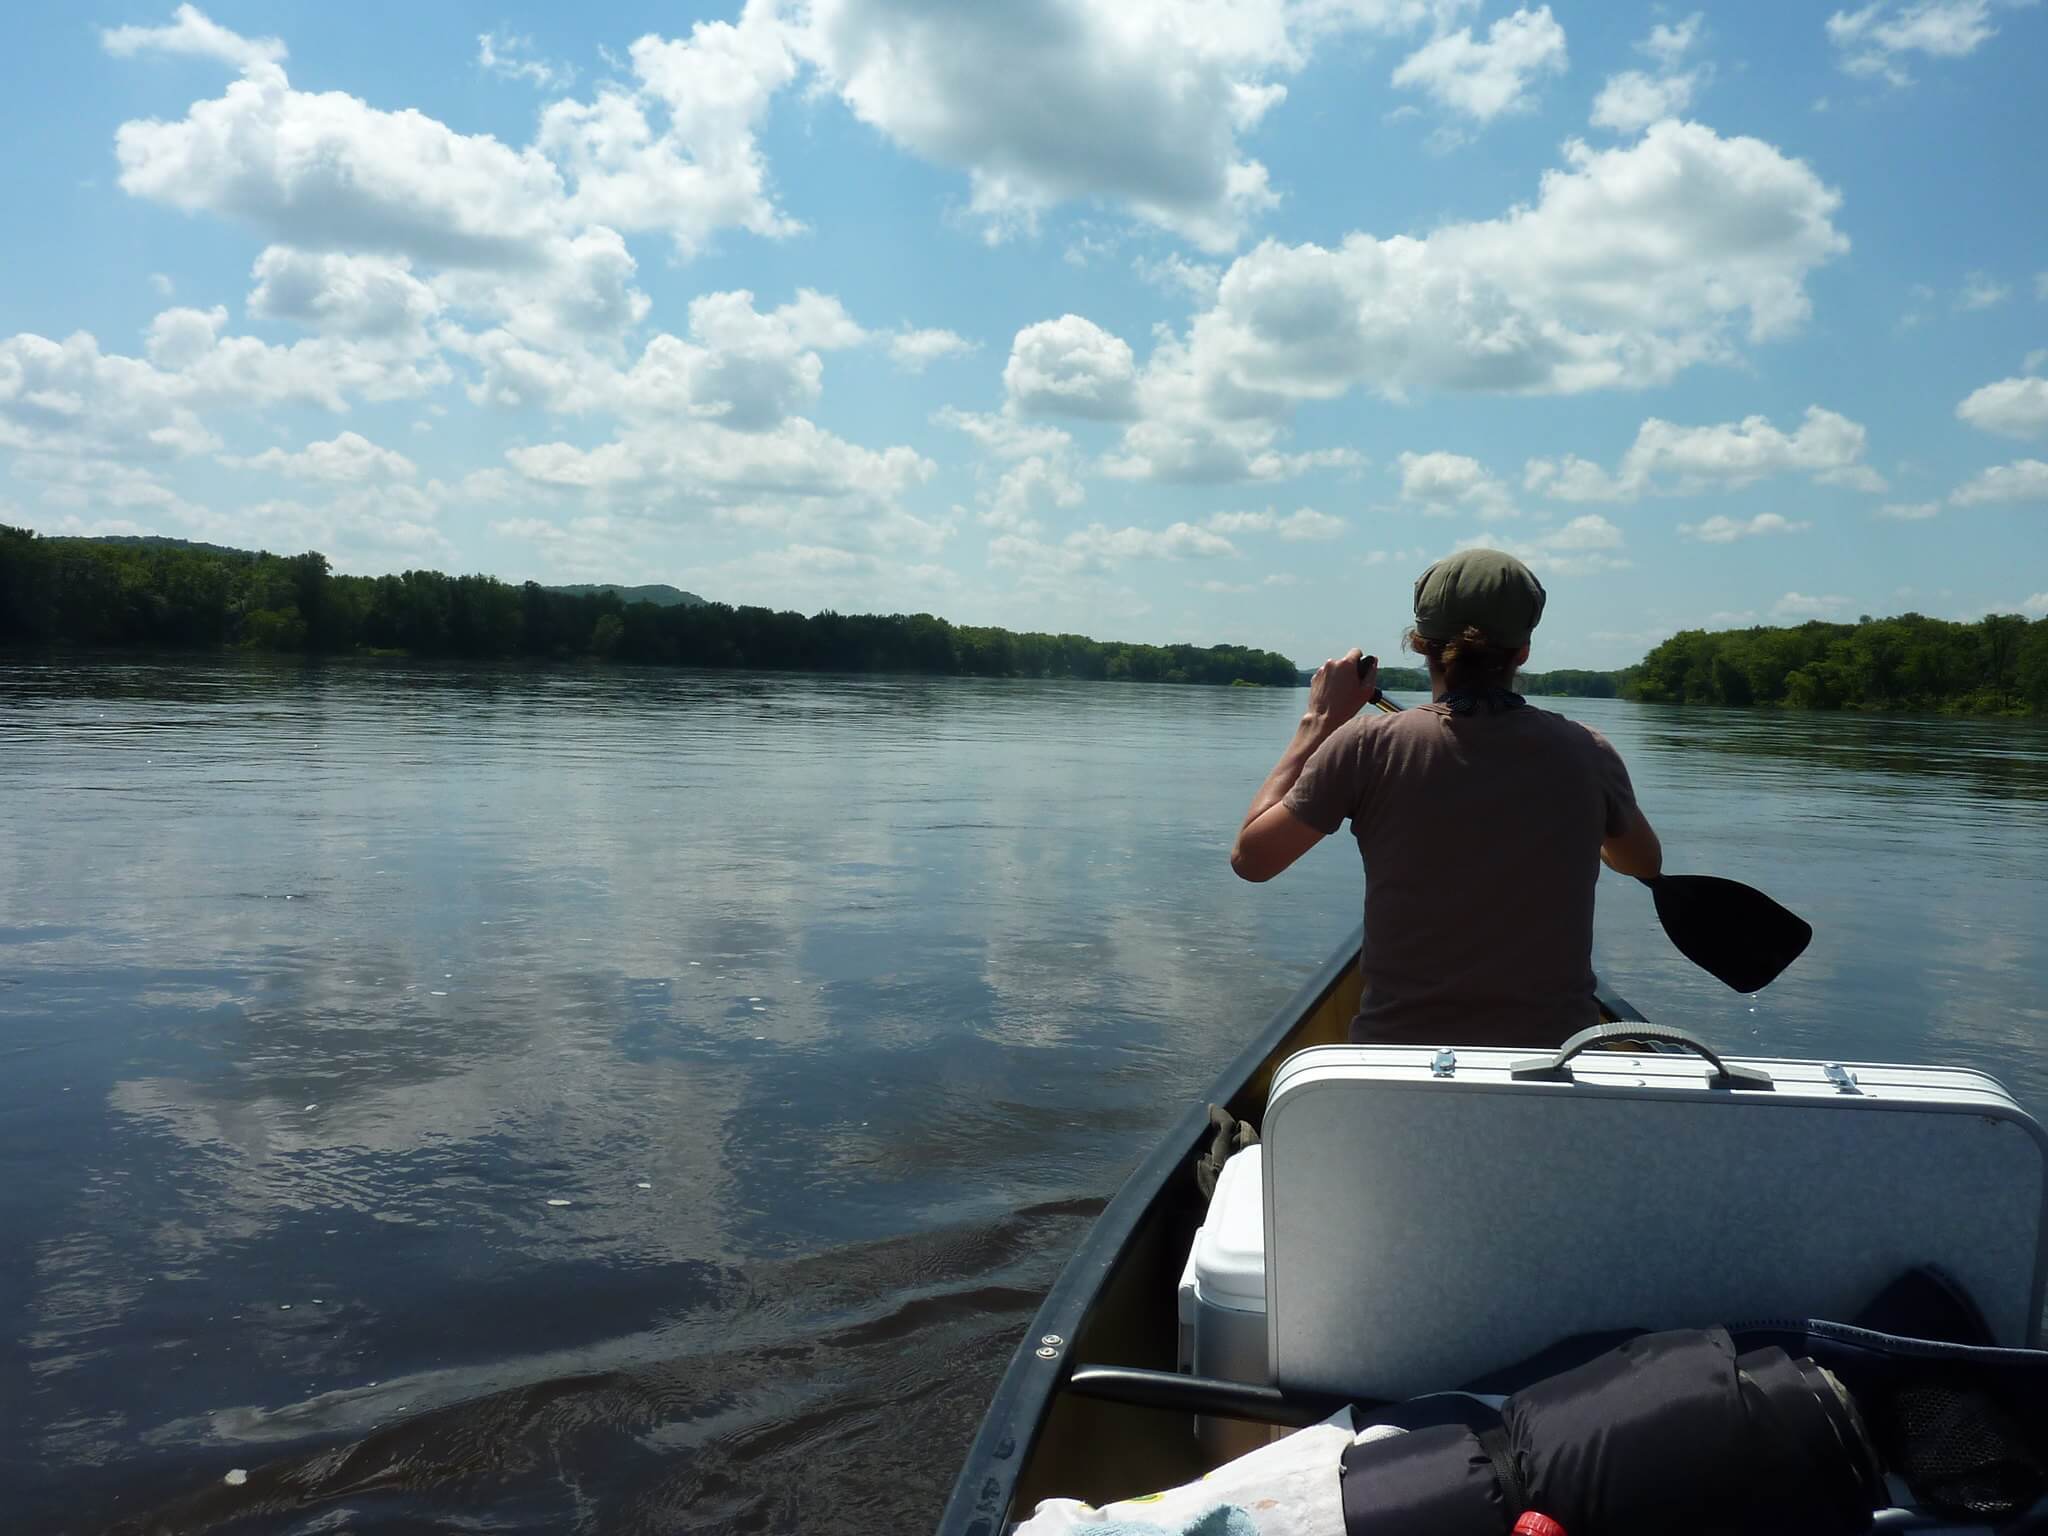 Canoeing on the Wisconsin River, where the city of Boscobel is seeking Knowles-Nelson funding to improve a boat launch.